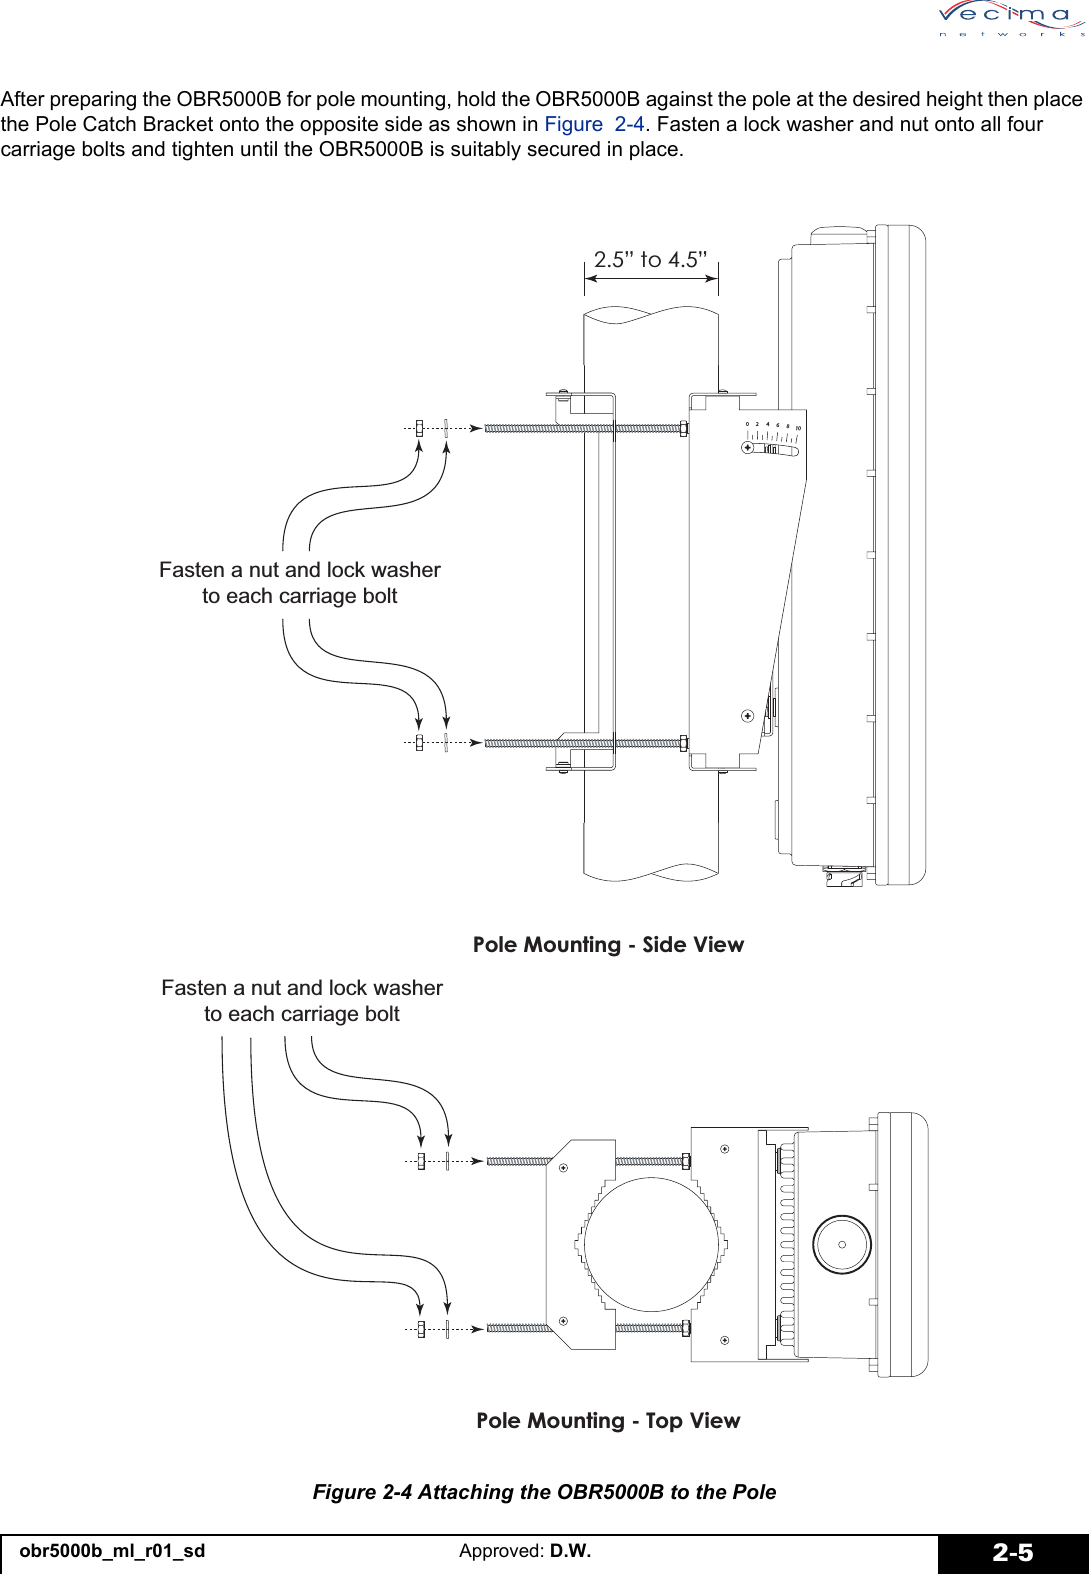 obr5000b_ml_r01_sd Approved: D.W. 2-5After preparing the OBR5000B for pole mounting, hold the OBR5000B against the pole at the desired height then place the Pole Catch Bracket onto the opposite side as shown in Figure  2-4. Fasten a lock washer and nut onto all four carriage bolts and tighten until the OBR5000B is suitably secured in place.Figure 2-4 Attaching the OBR5000B to the Pole3ROH0RXQWLQJ6LGH9LHZ3ROH0RXQWLQJ7RS9LHZµWRµ)DVWHQDQXWDQGORFNZDVKHUWRHDFKFDUULDJHEROW)DVWHQDQXWDQGORFNZDVKHUWRHDFKFDUULDJHEROW